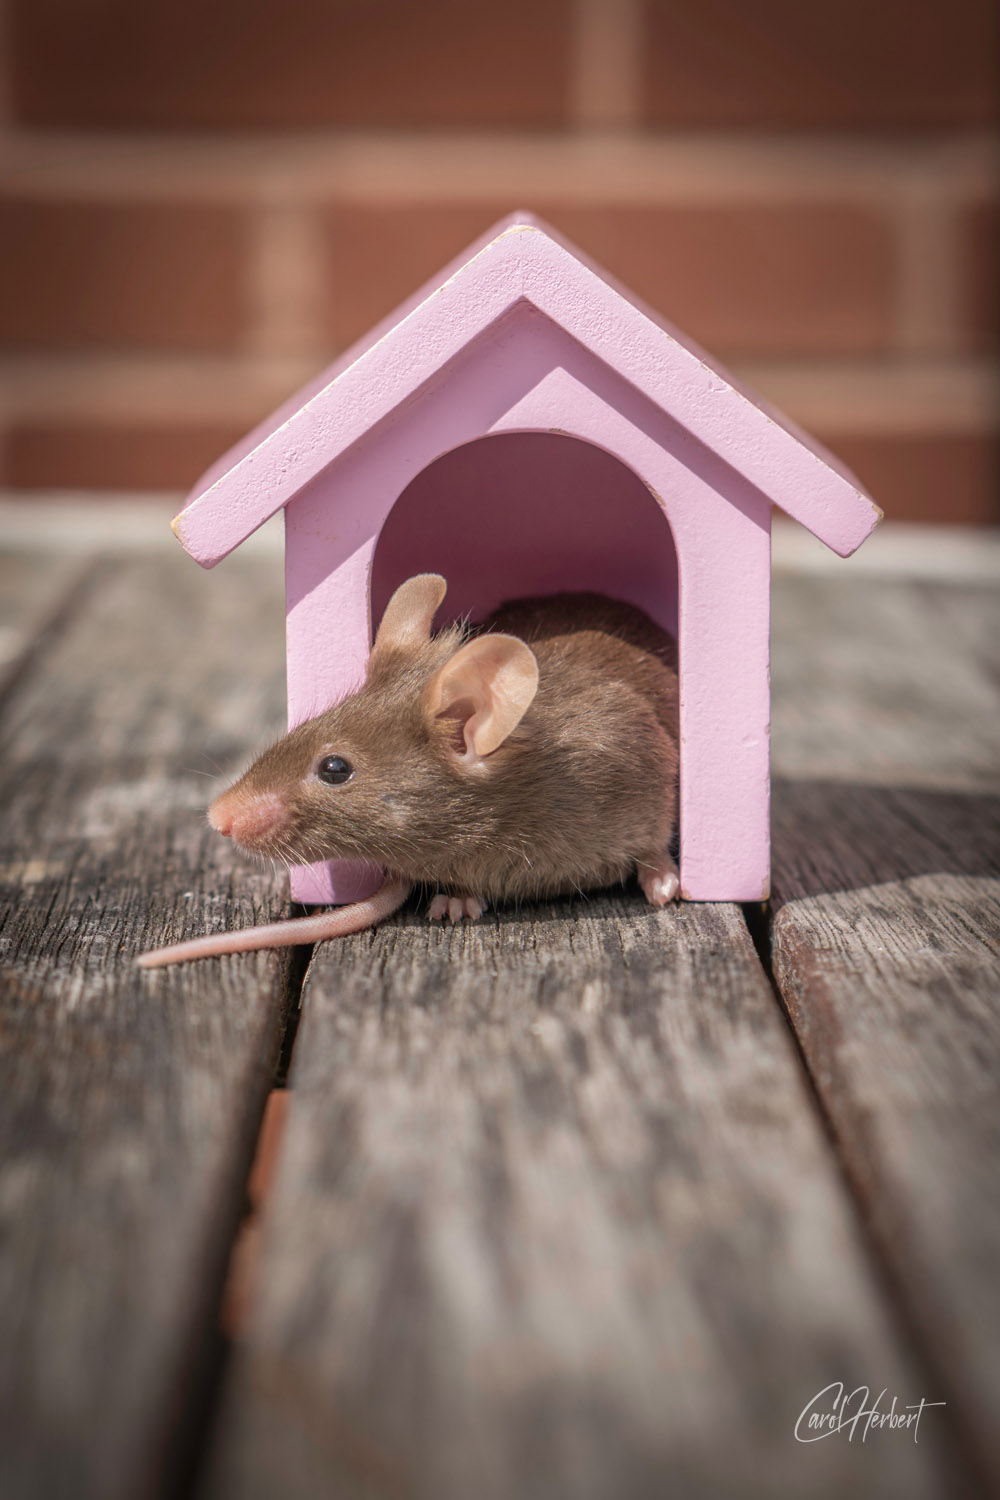 A brown fancy mouse in a pink toy dog house